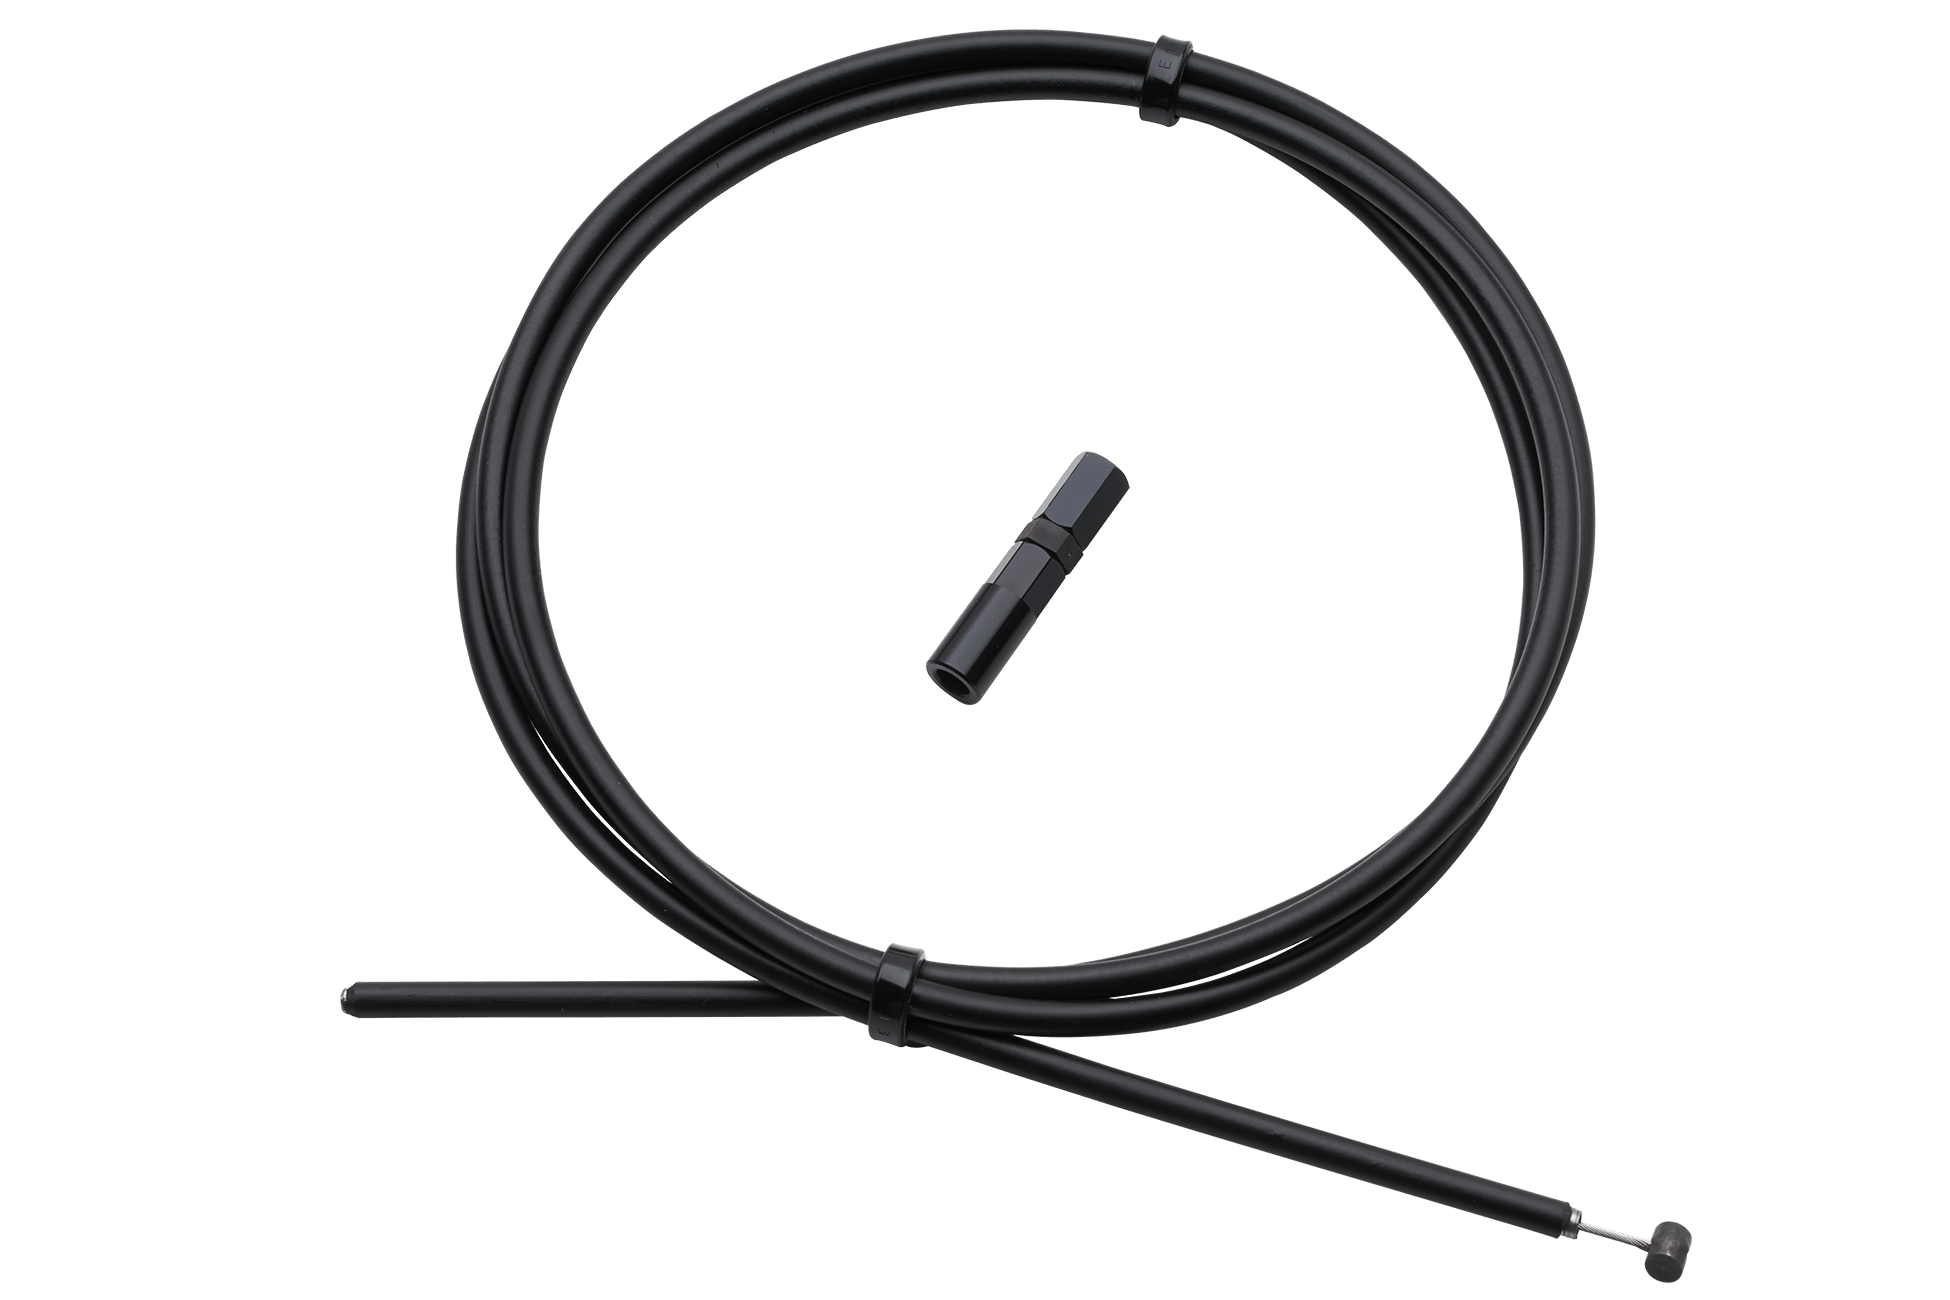 Internal throttle cable for HARLEY-DAVIDSON motorcycles